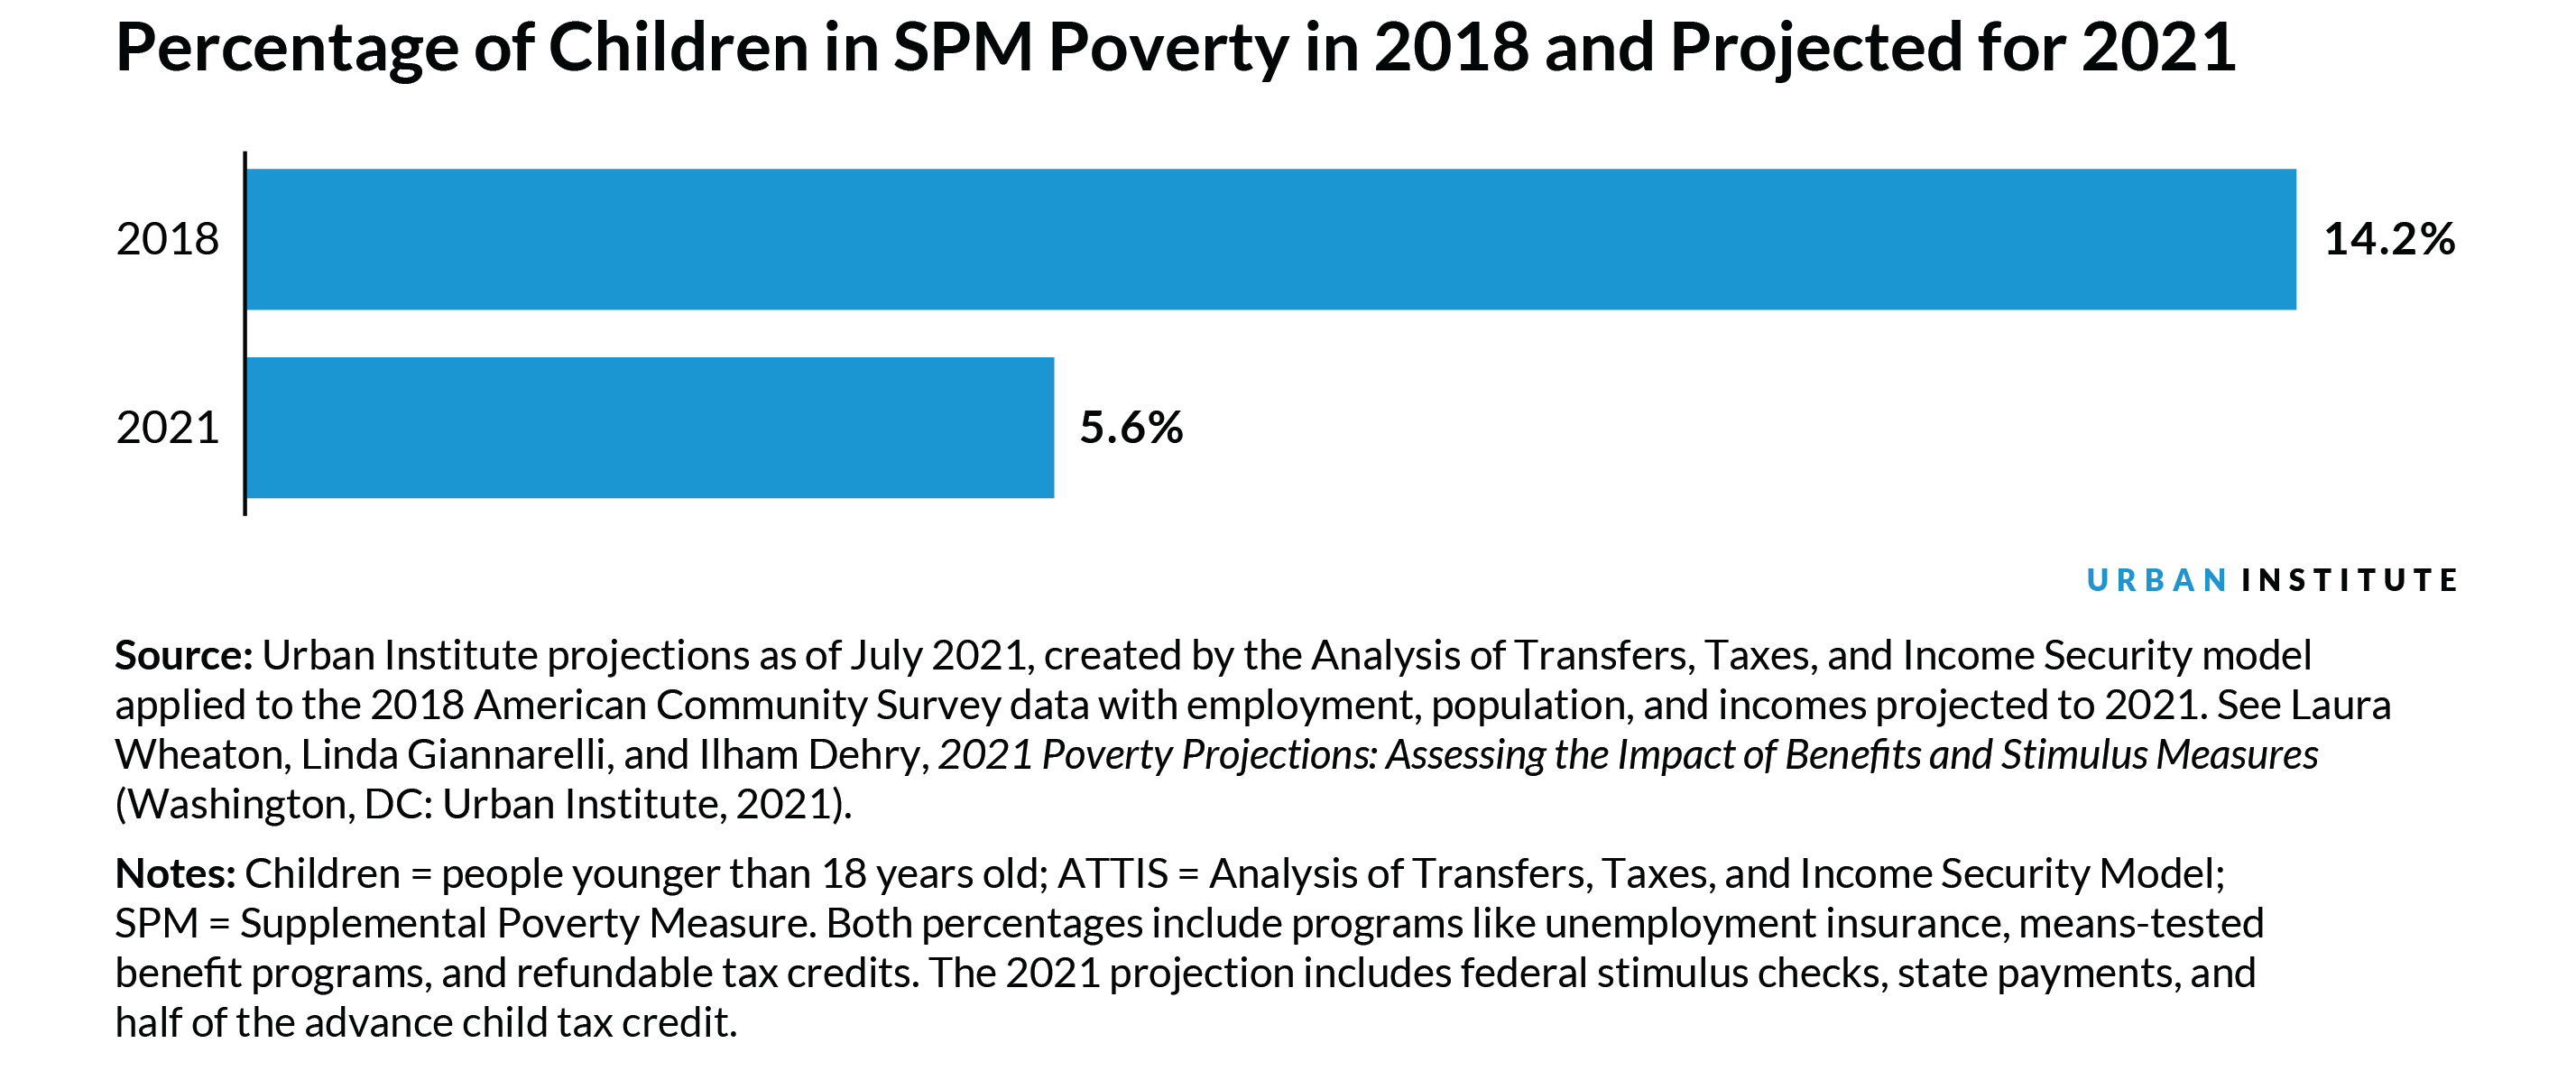 Percentage of Children in SPM Poverty in 2018 and Projected for 2021